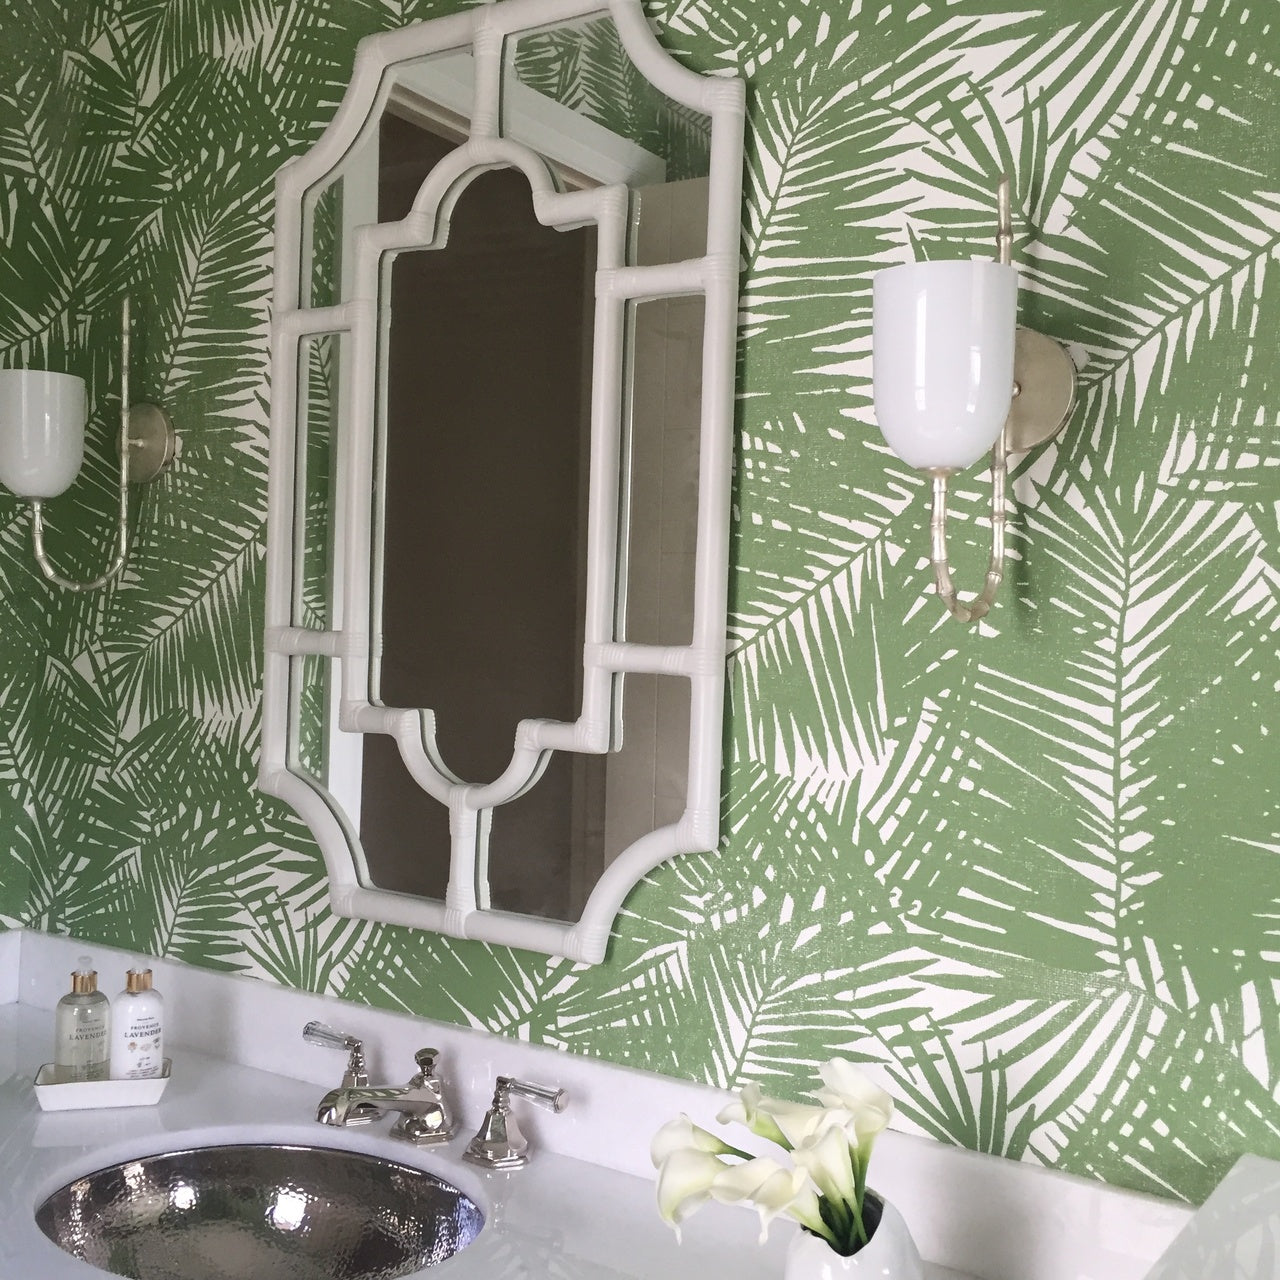 a photo of a bathroom with a metal sink, green bathroom wallpaper and white frame mirror